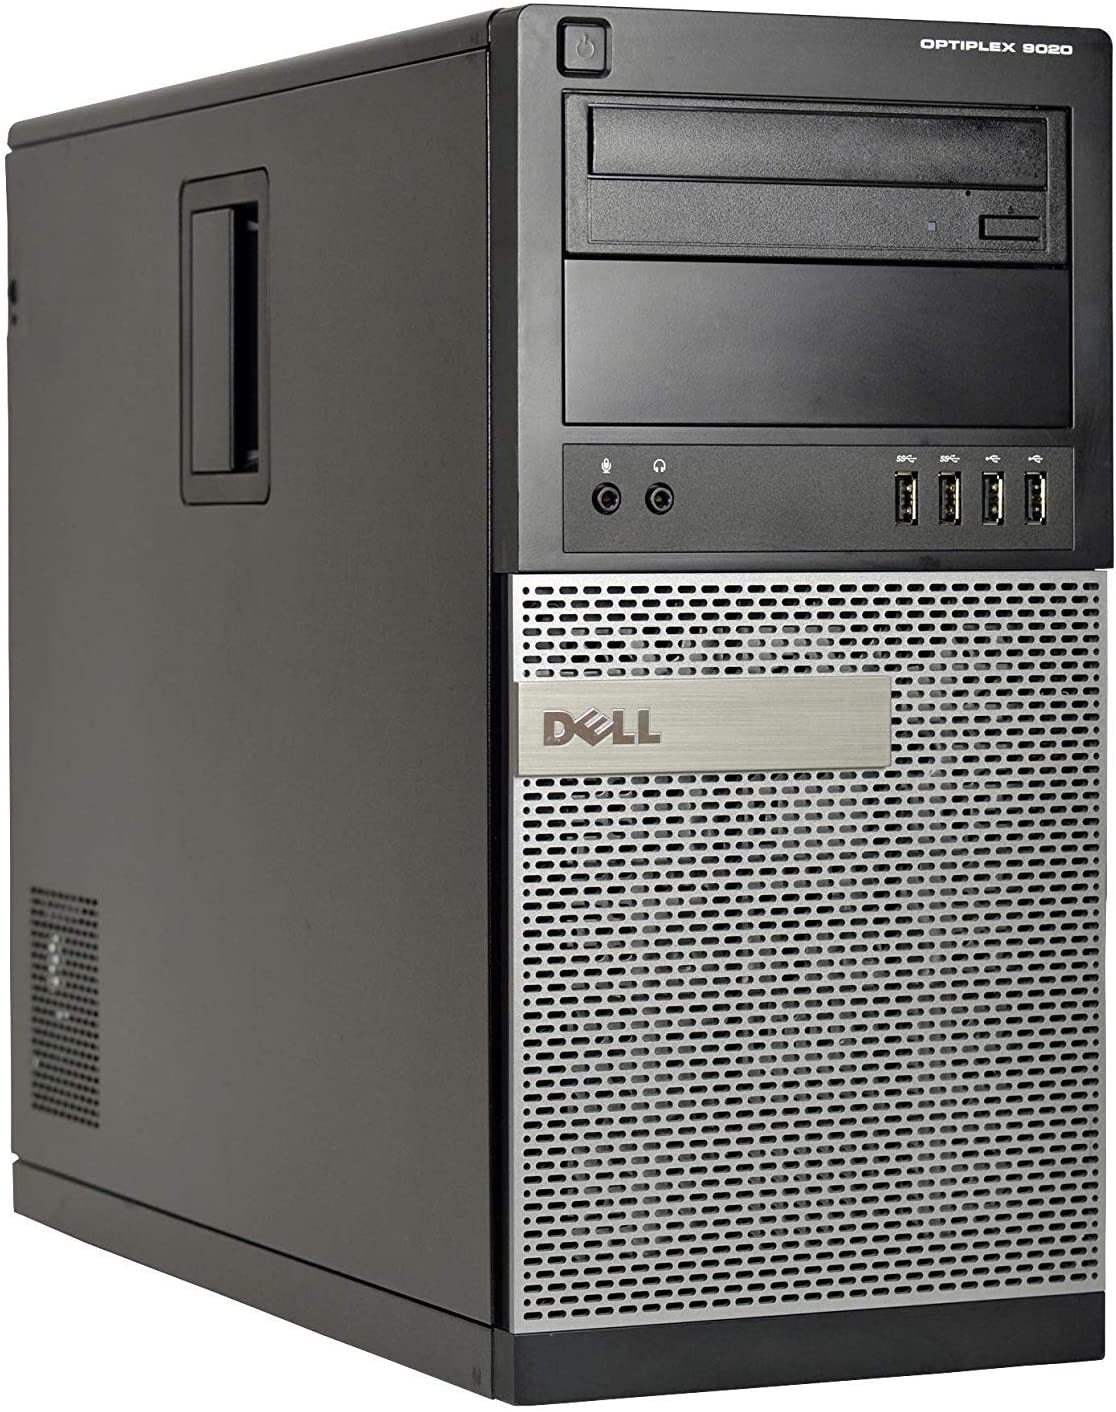 Primary image for Dell Desktop Tower 9020 Computer i3 | 8GB | 1TB SSD |  Windows 10 PC WiFi